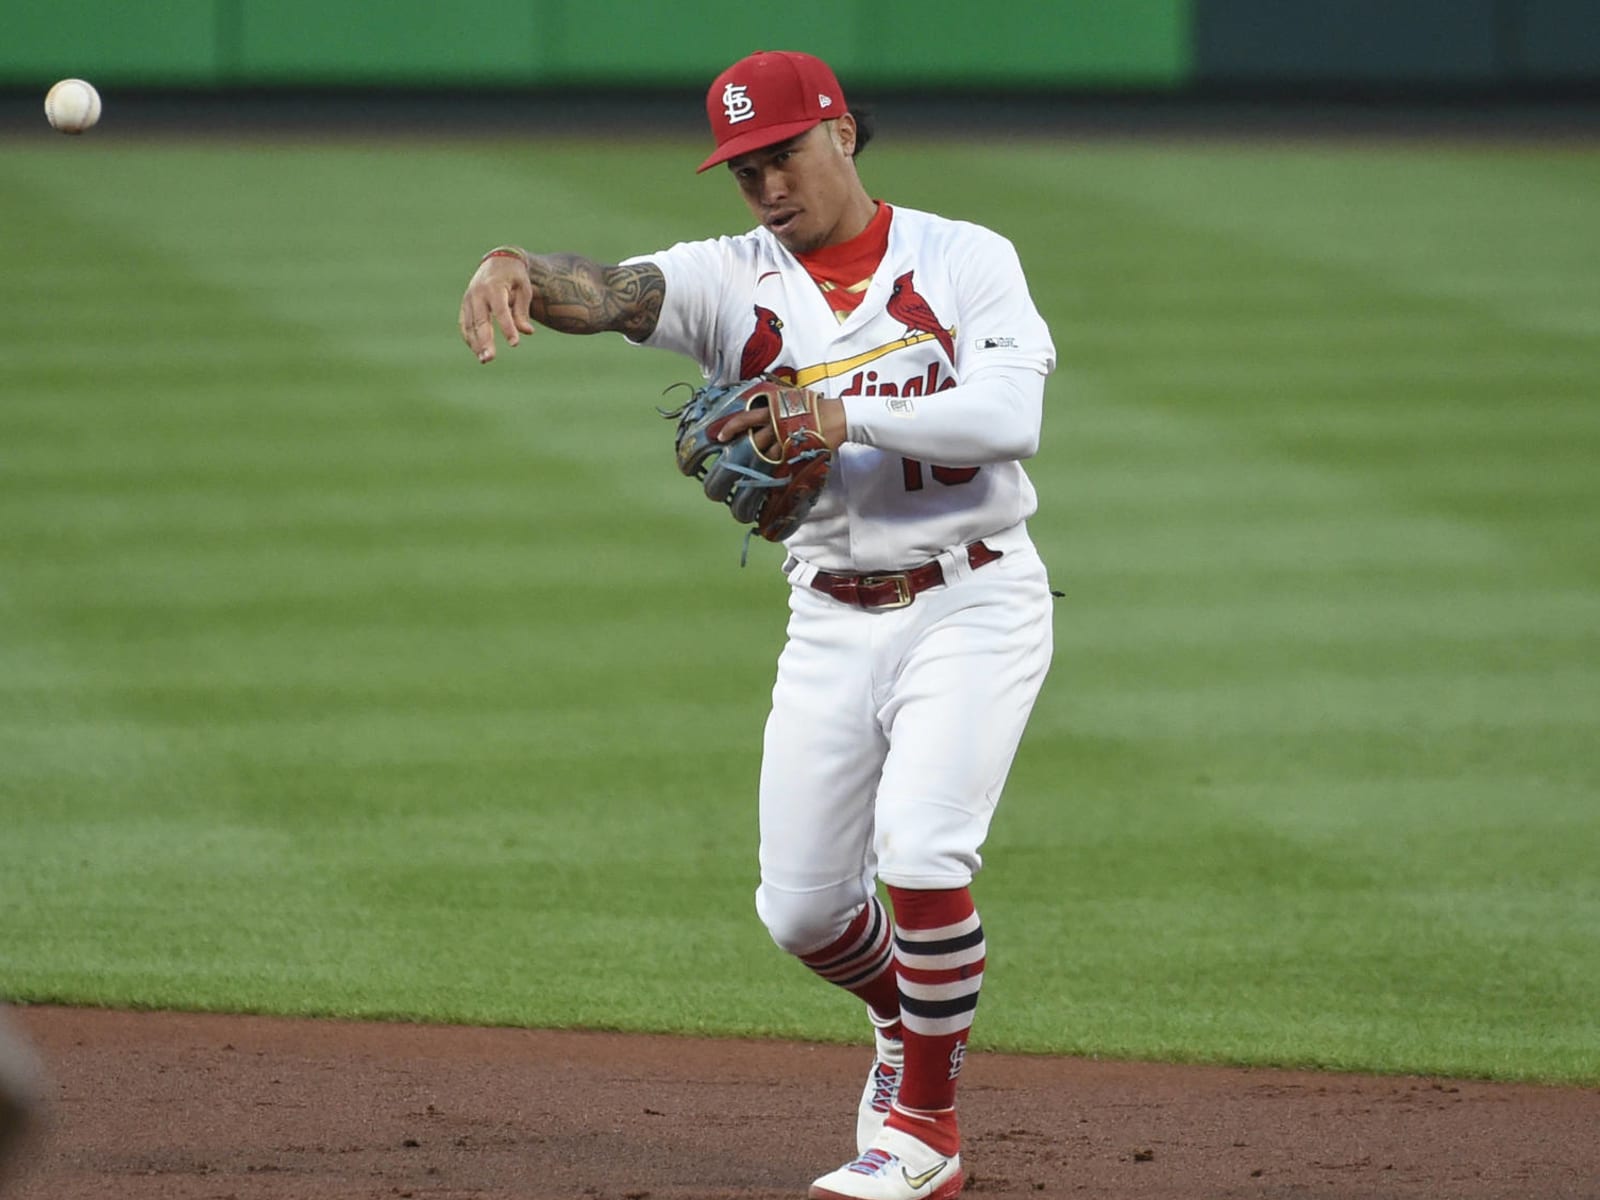 Report: Brewers, Kolten Wong agree to two-year, $18M contract